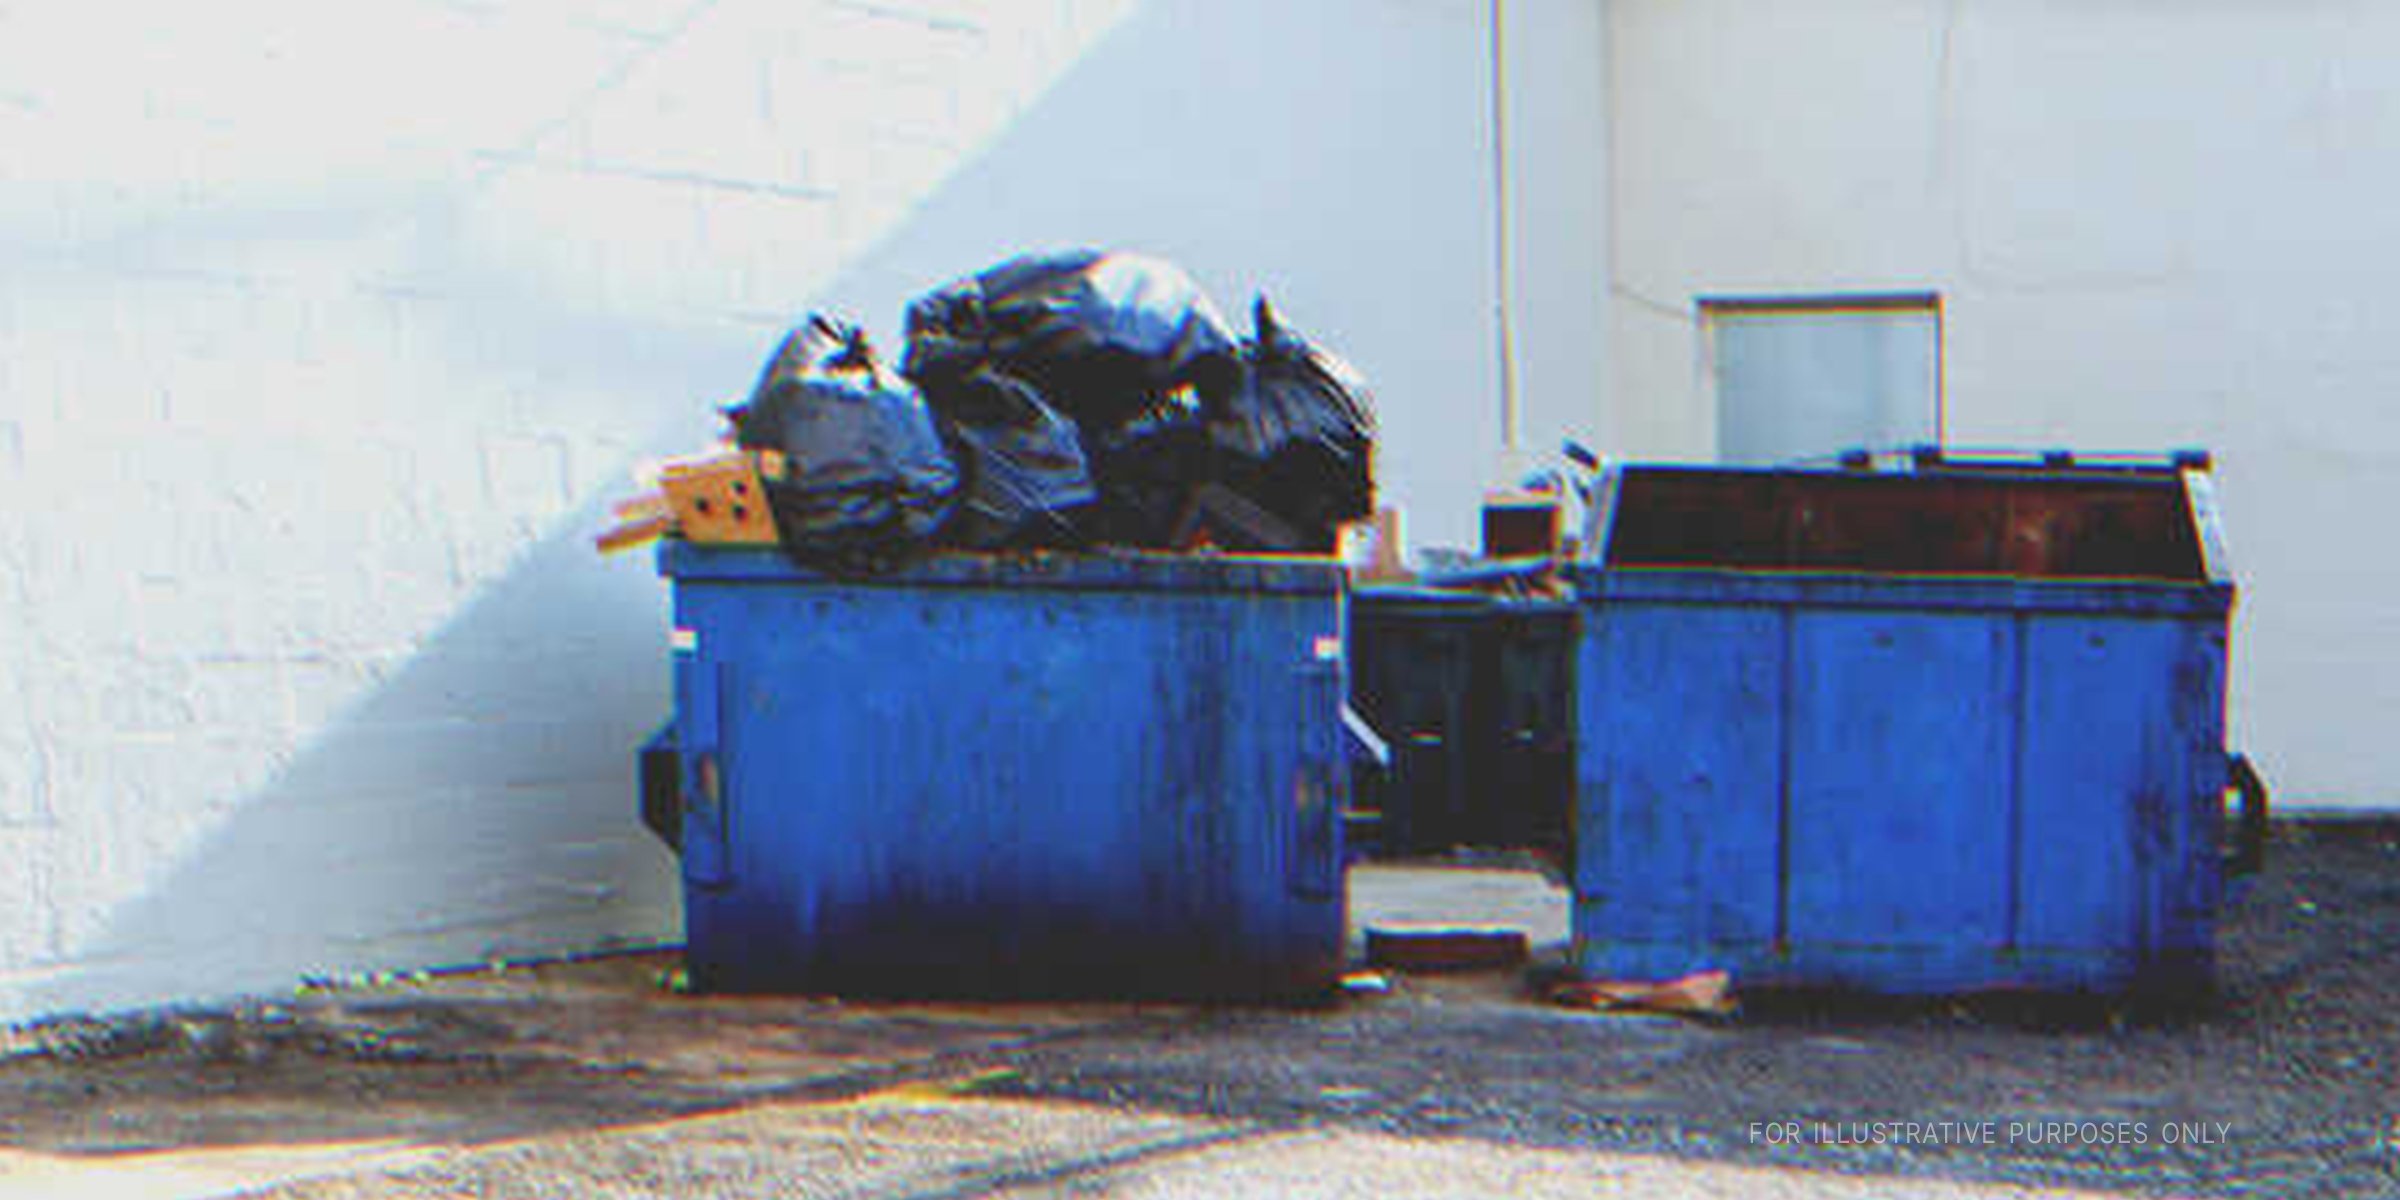 Dumpsters overflowing with garbage. | Source: Shutterstock